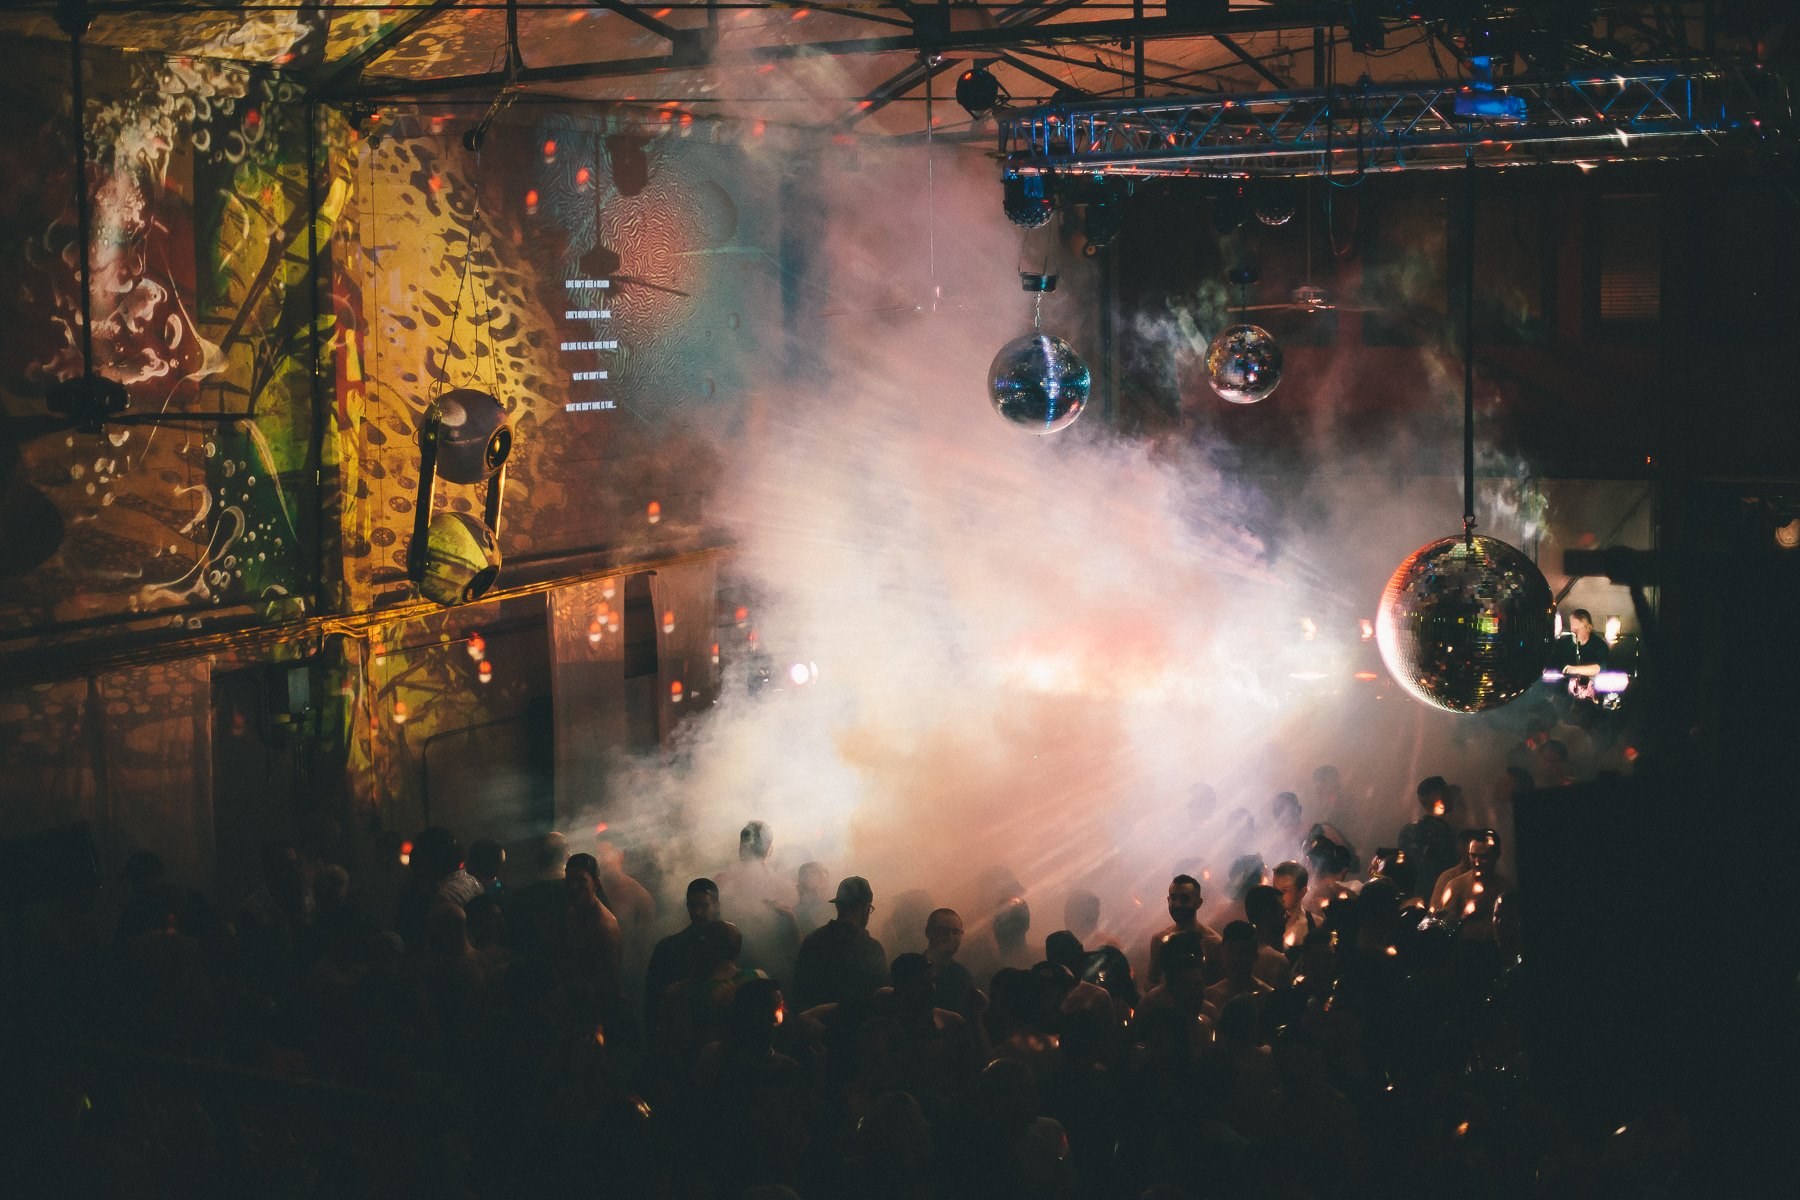 7 Of The Best Parties In San Francisco Features Mixmag